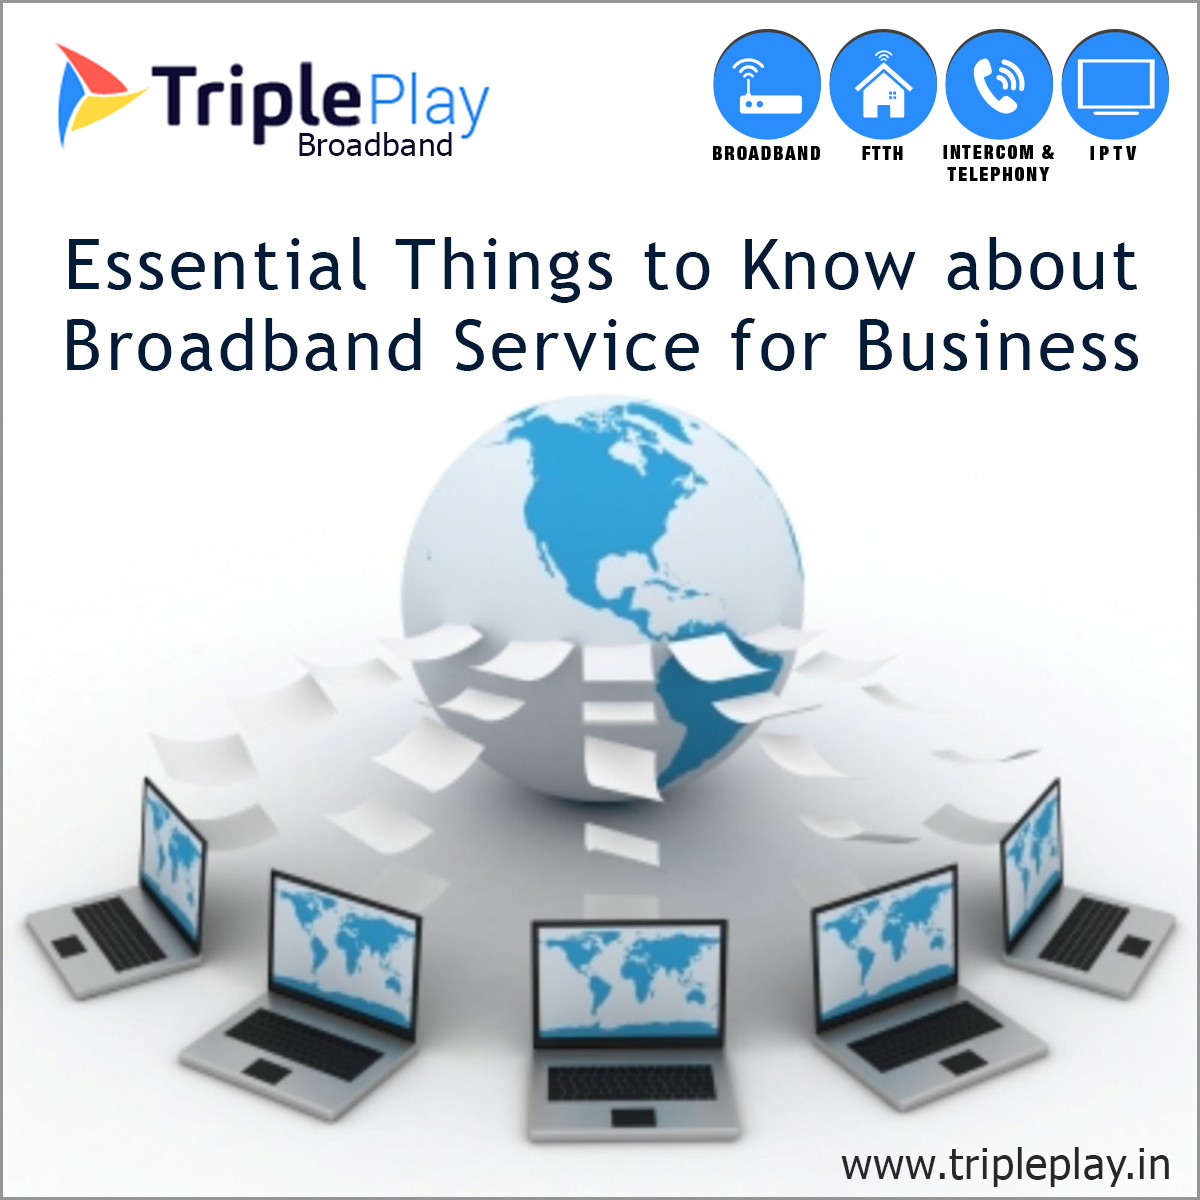 Essential Things to Know about Broadband Service for Business